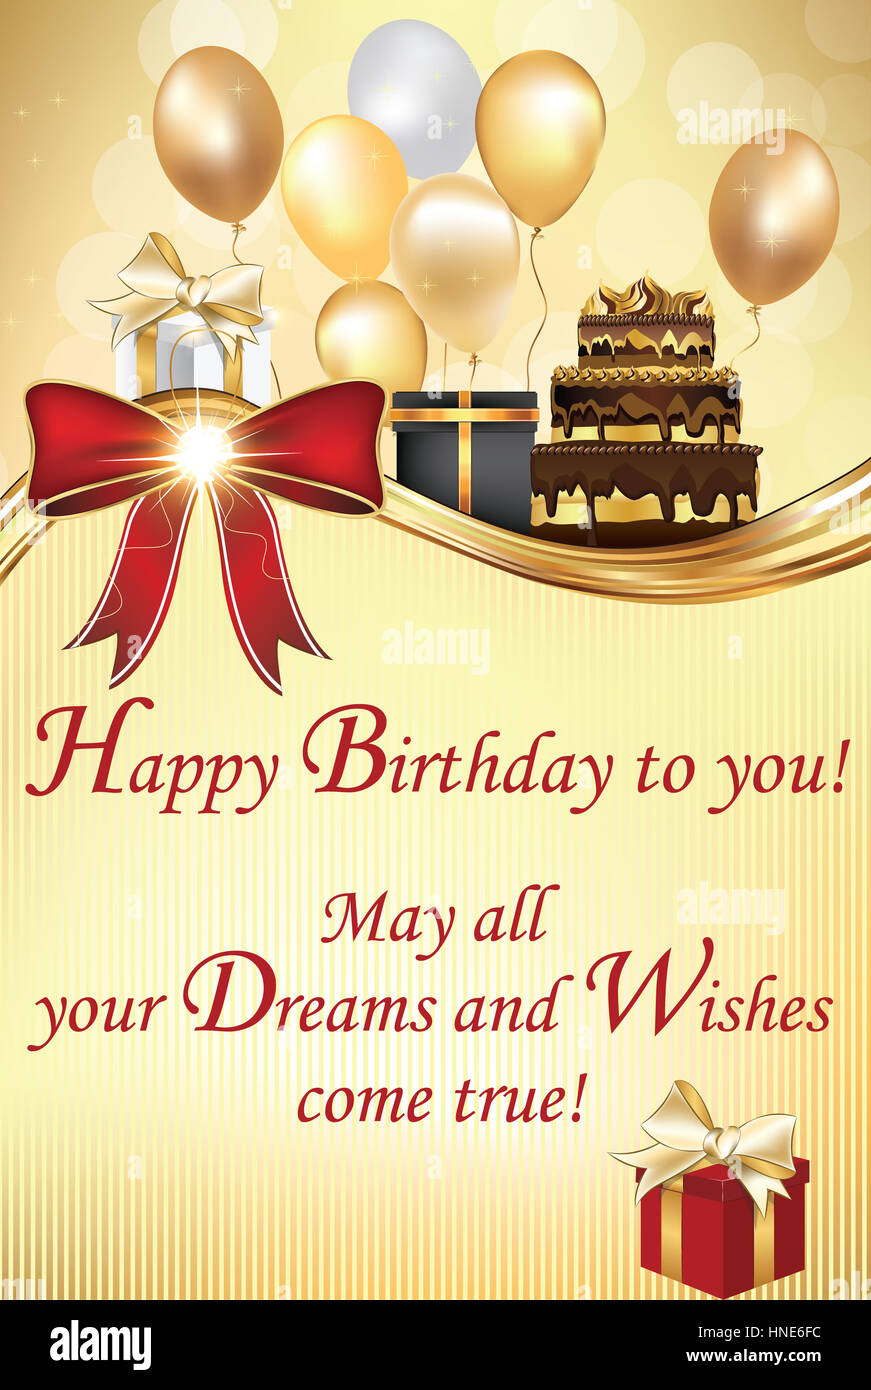 Birthday greeting card - May all your Dreams and Wishes come true ...